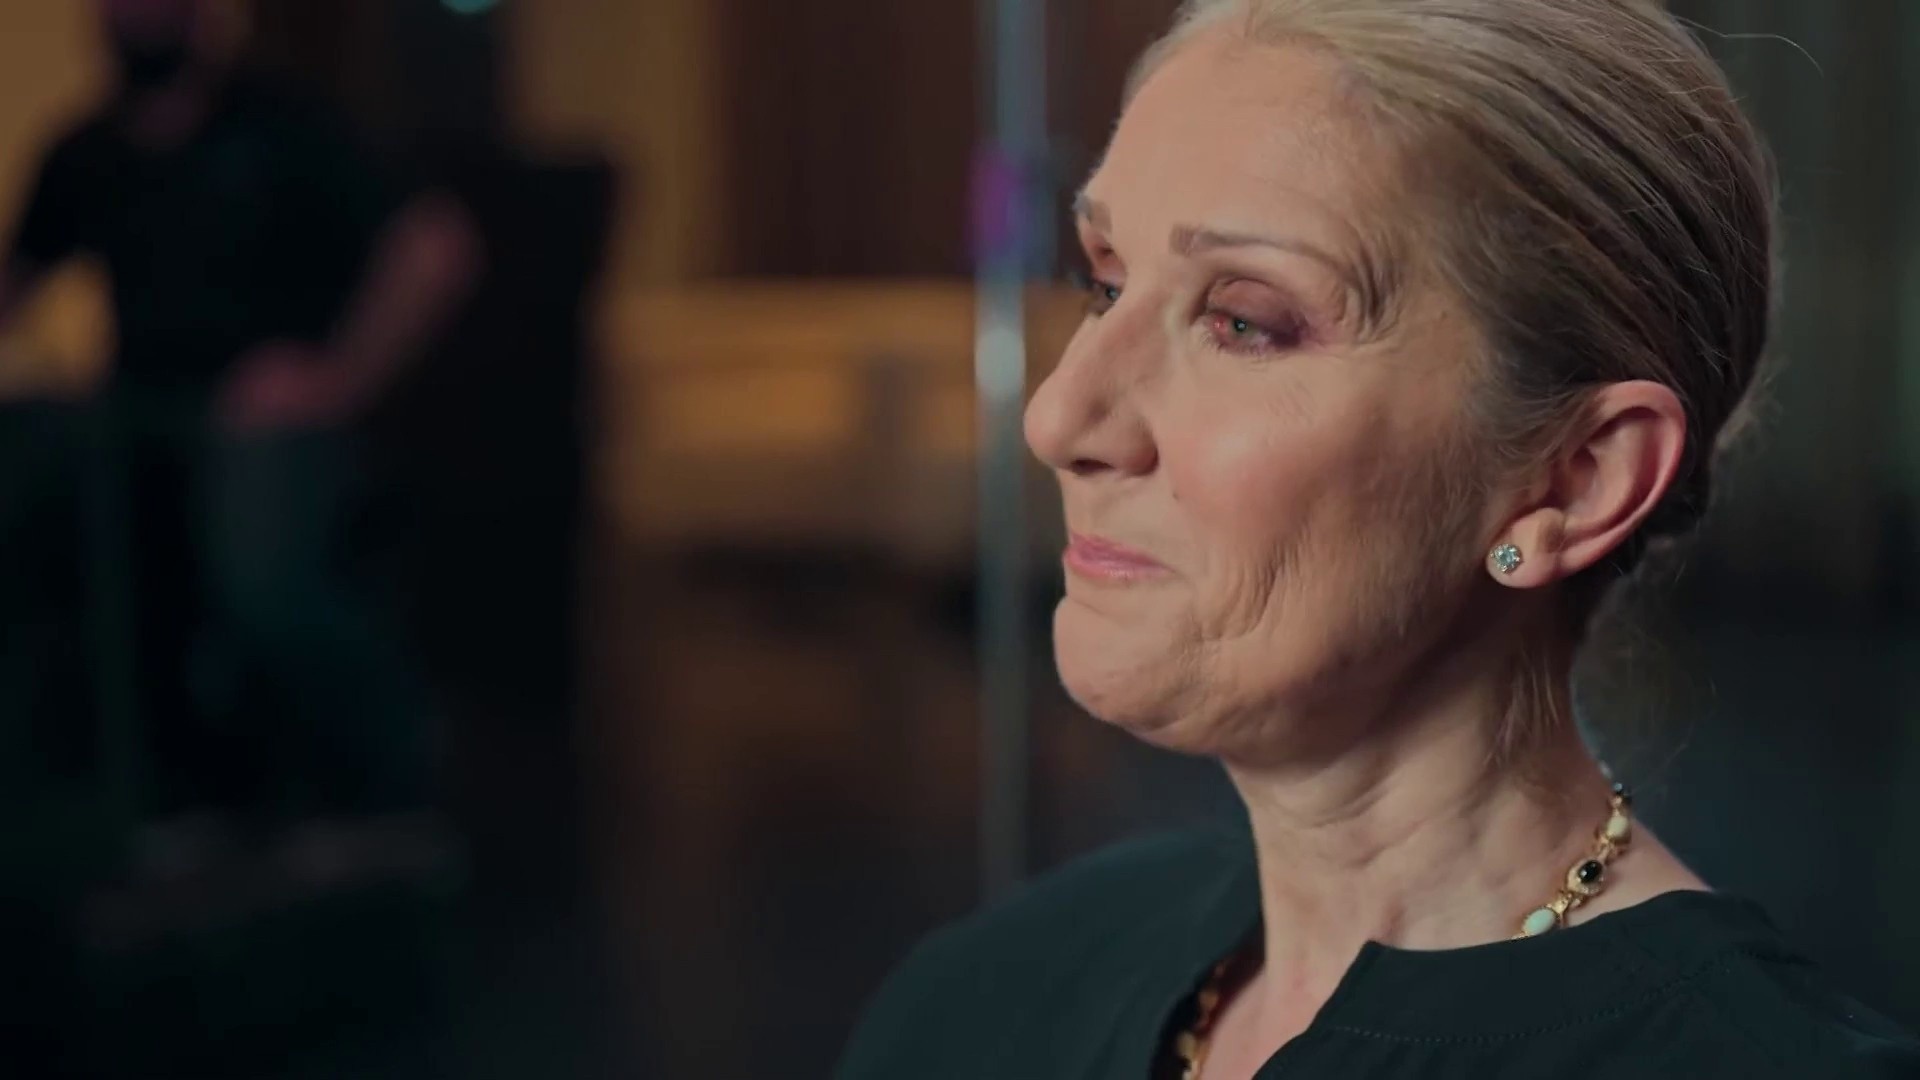 See trailer for new 'I Am: Celine Dion' documentary